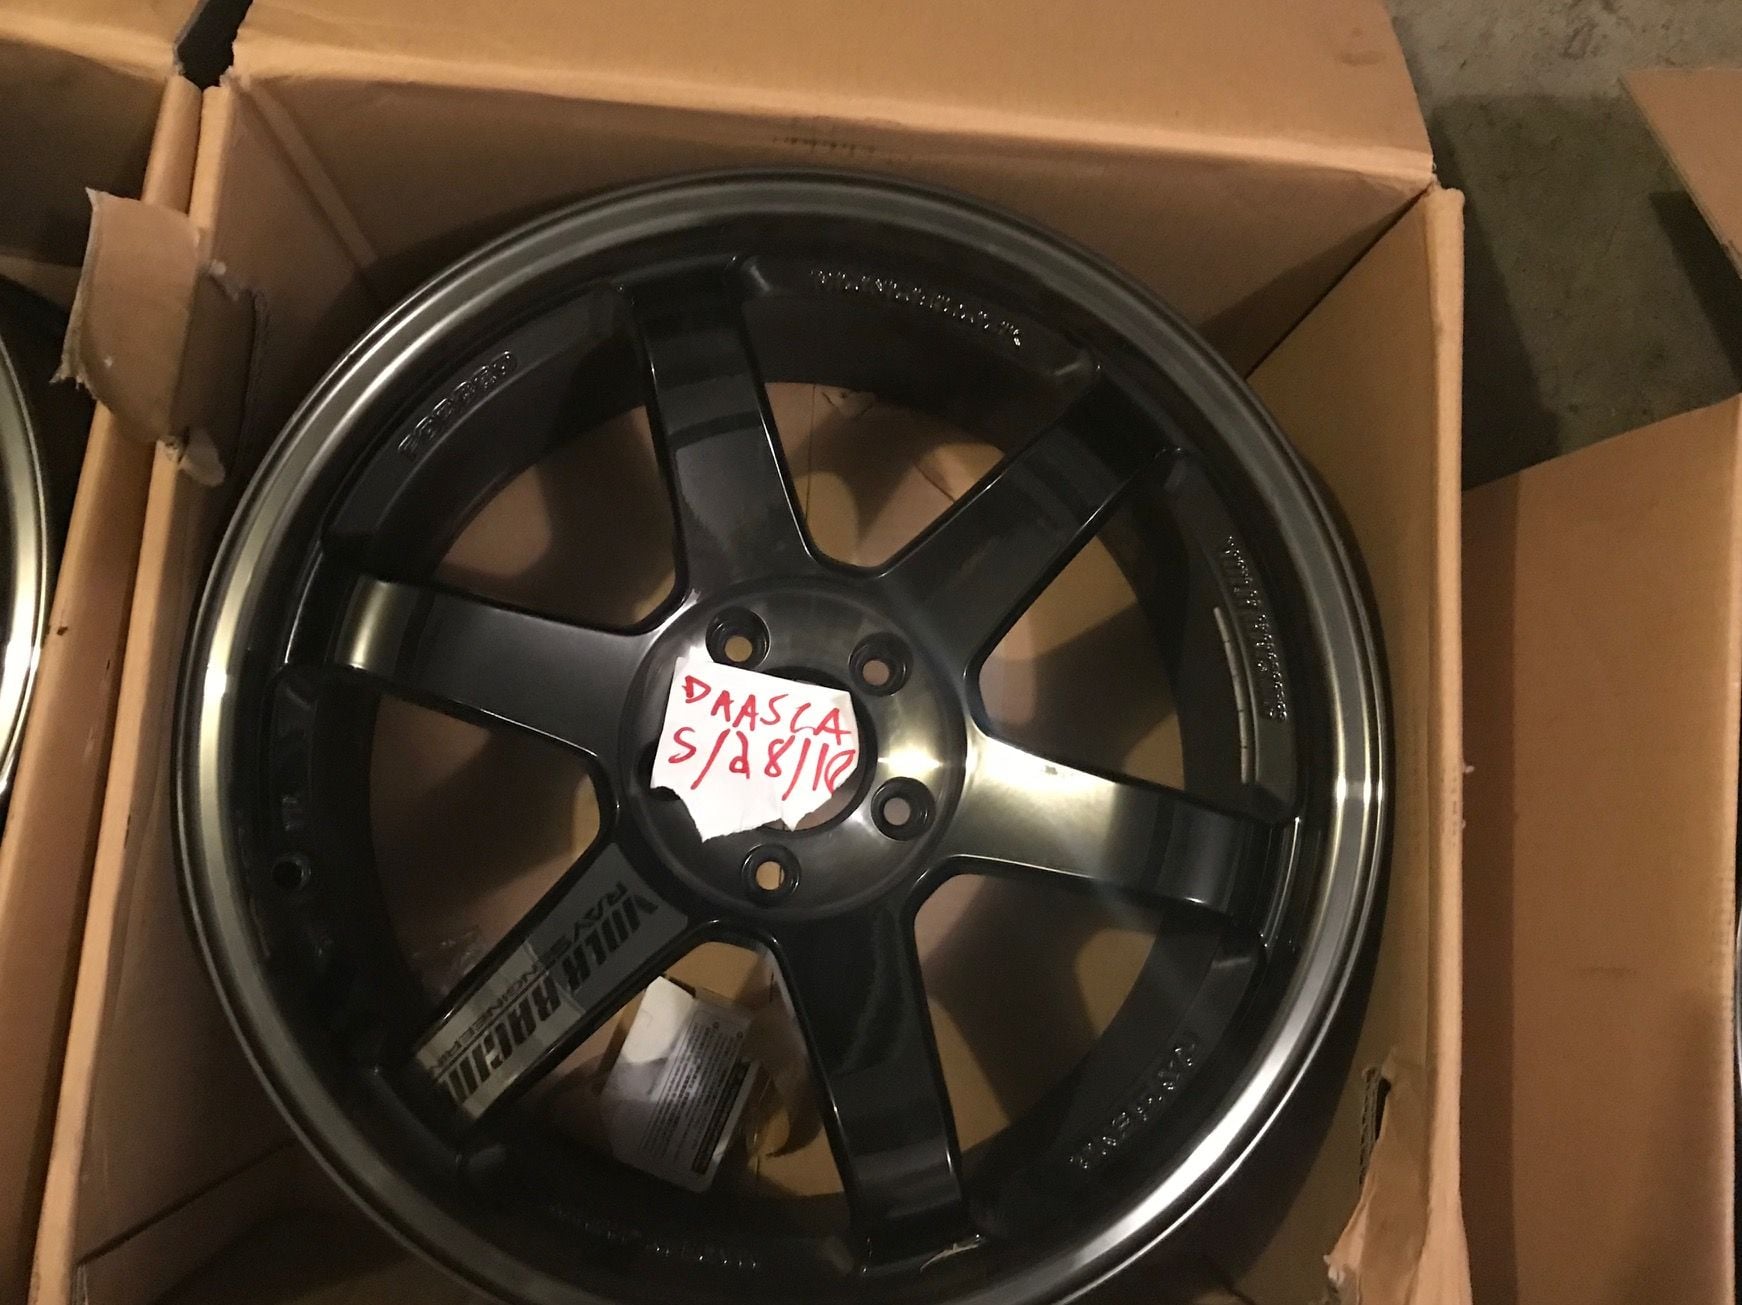 Wheels and Tires/Axles - Volk TE37SL Double Pressed Black, 18x9.5 +22, 500 miles - Used - 2008 to 2015 Mitsubishi Lancer Evolution - Pace, FL 32571, United States